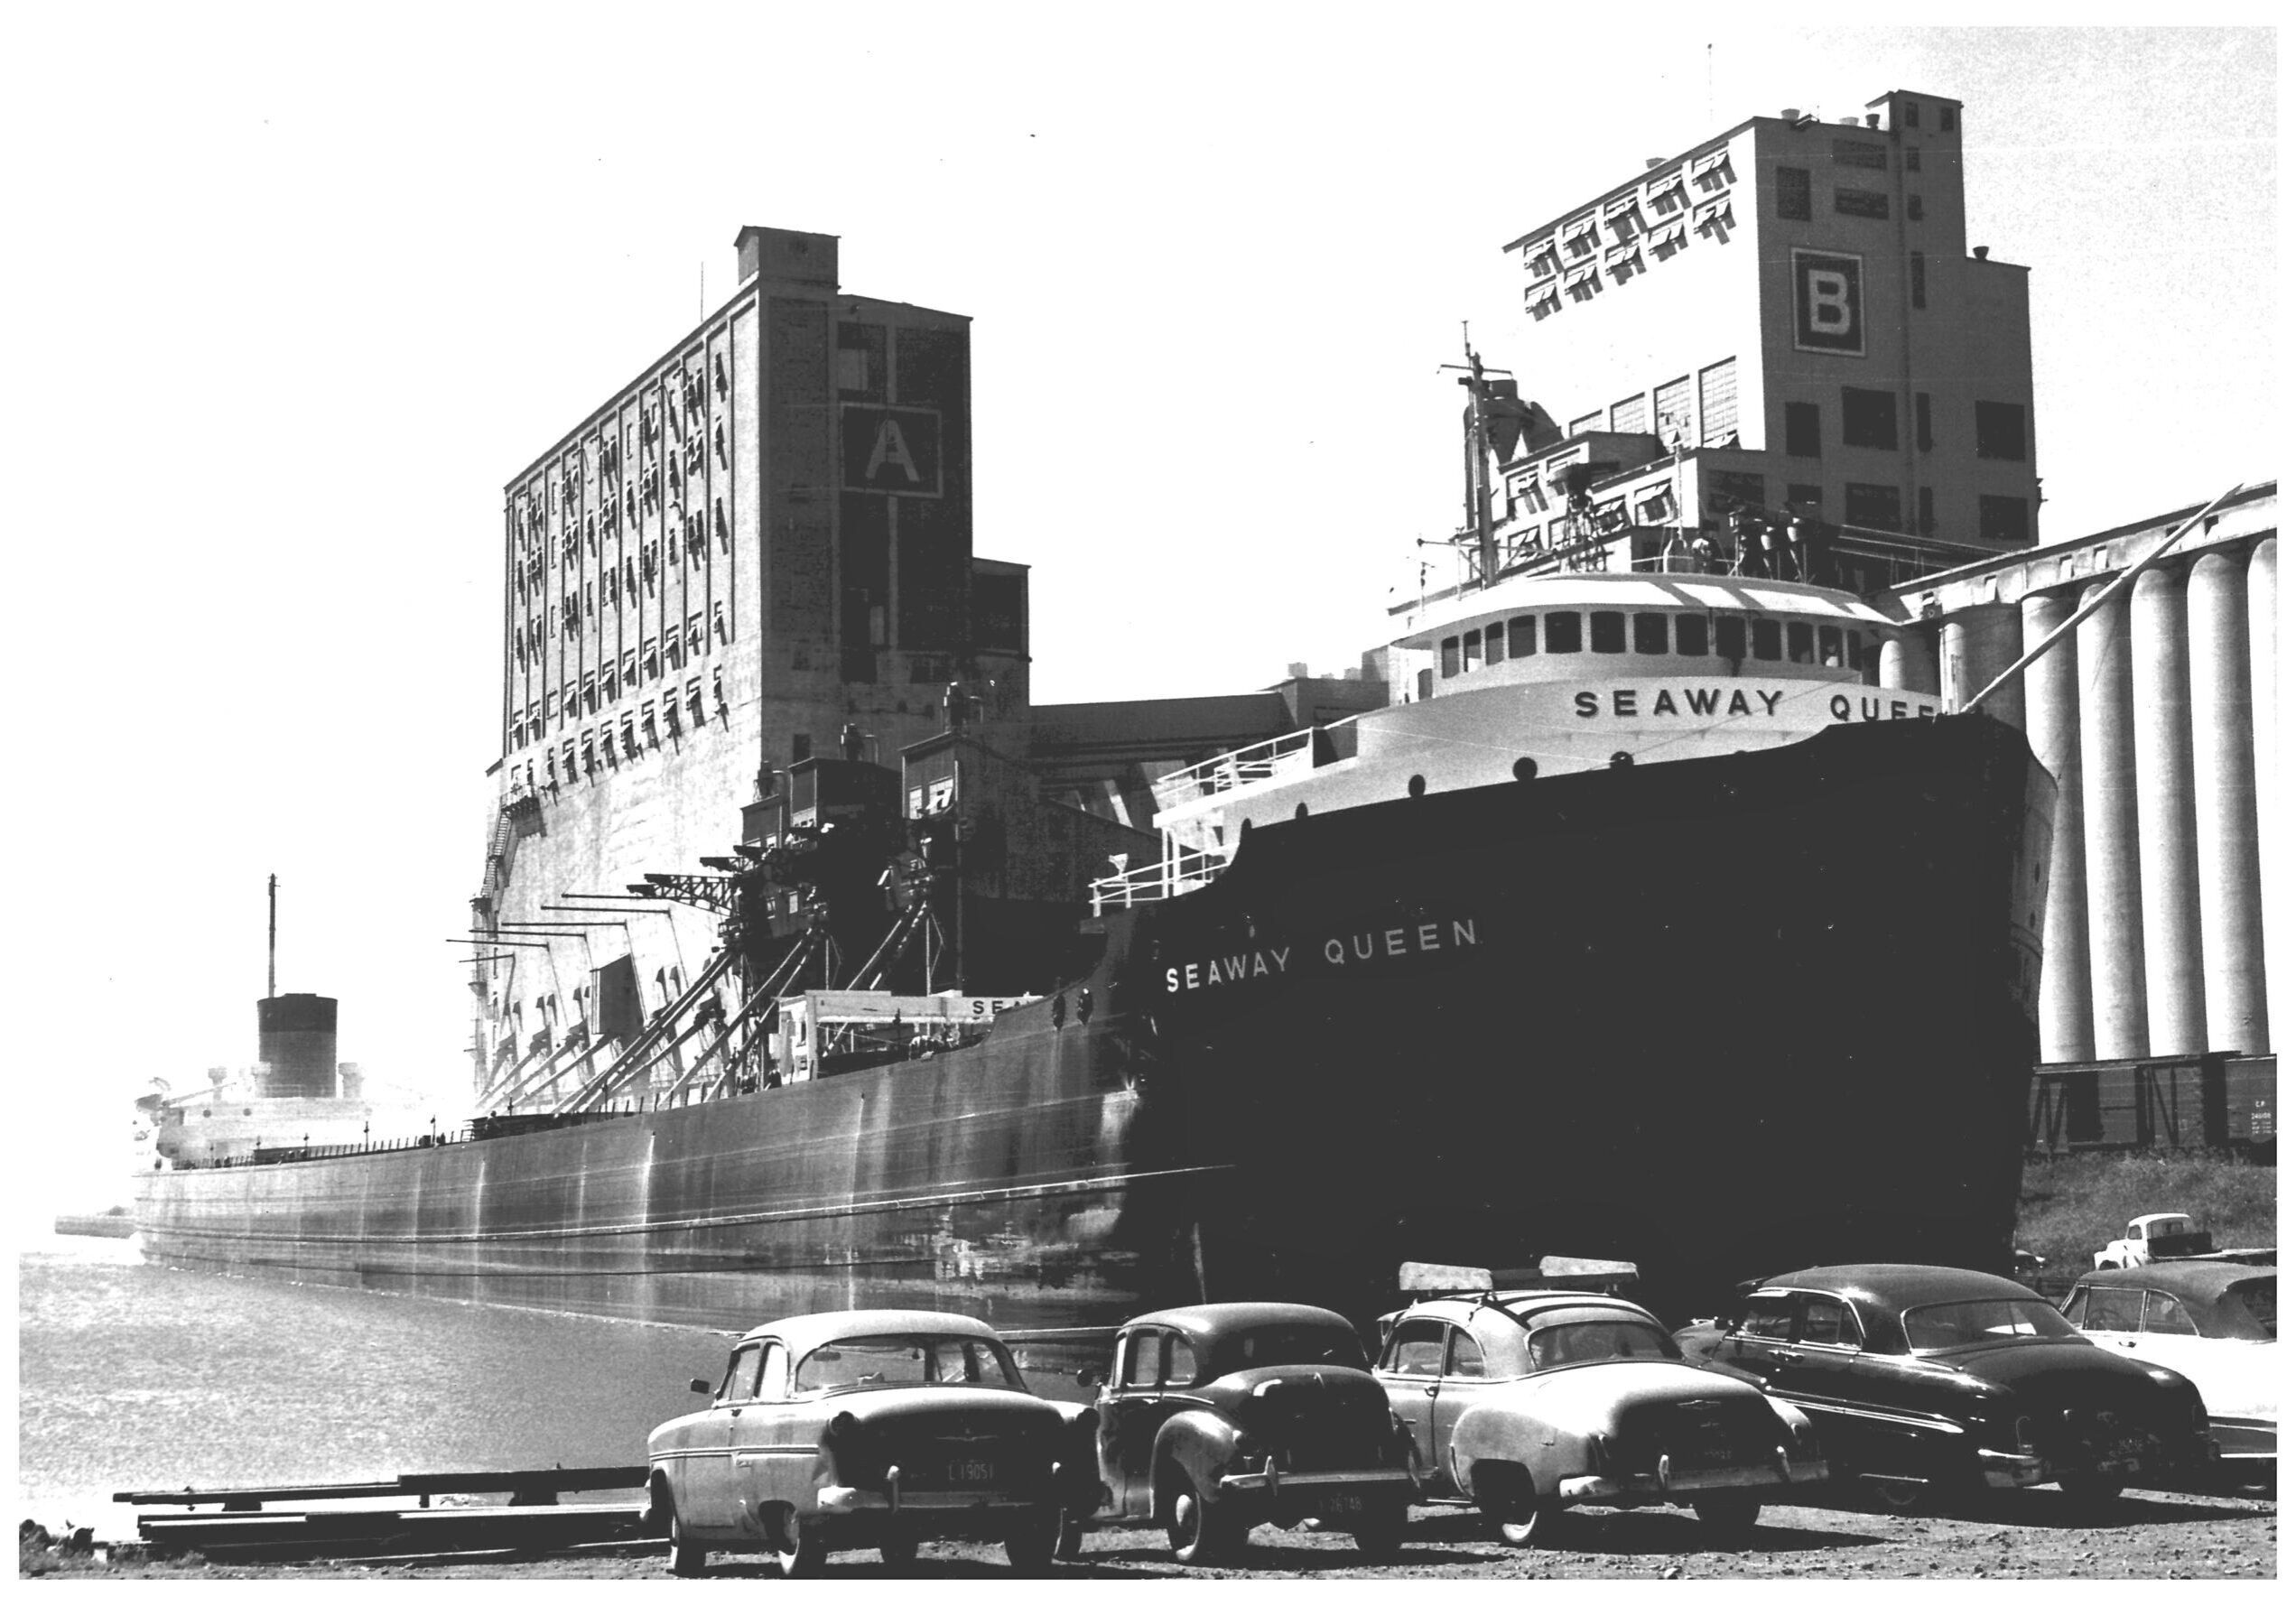 black and white image of cars parked in front of the water with a boat docked in behind, and elevator in the background